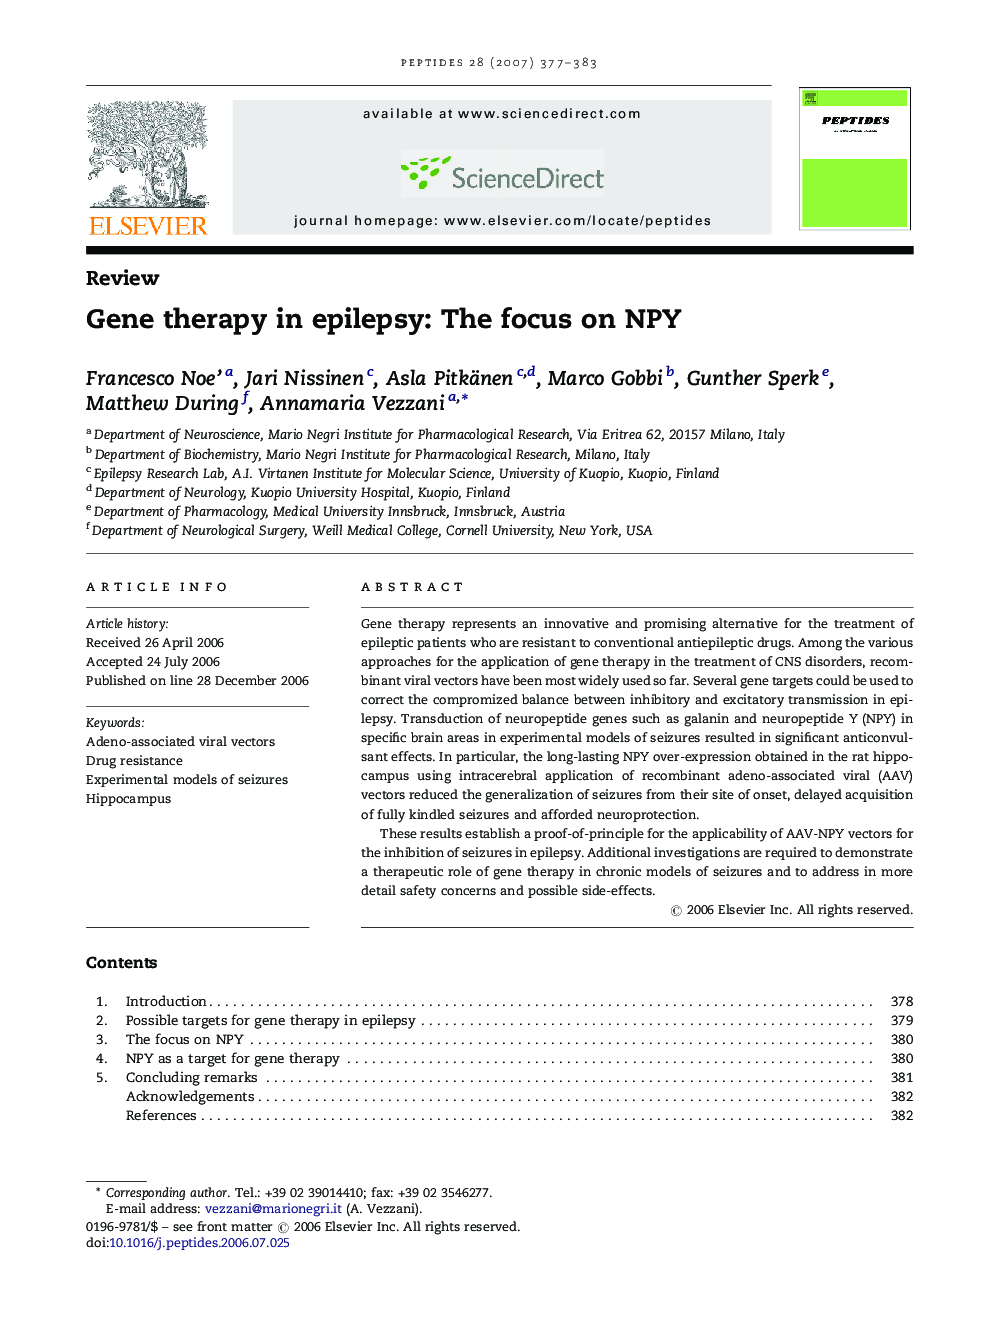 Gene therapy in epilepsy: The focus on NPY